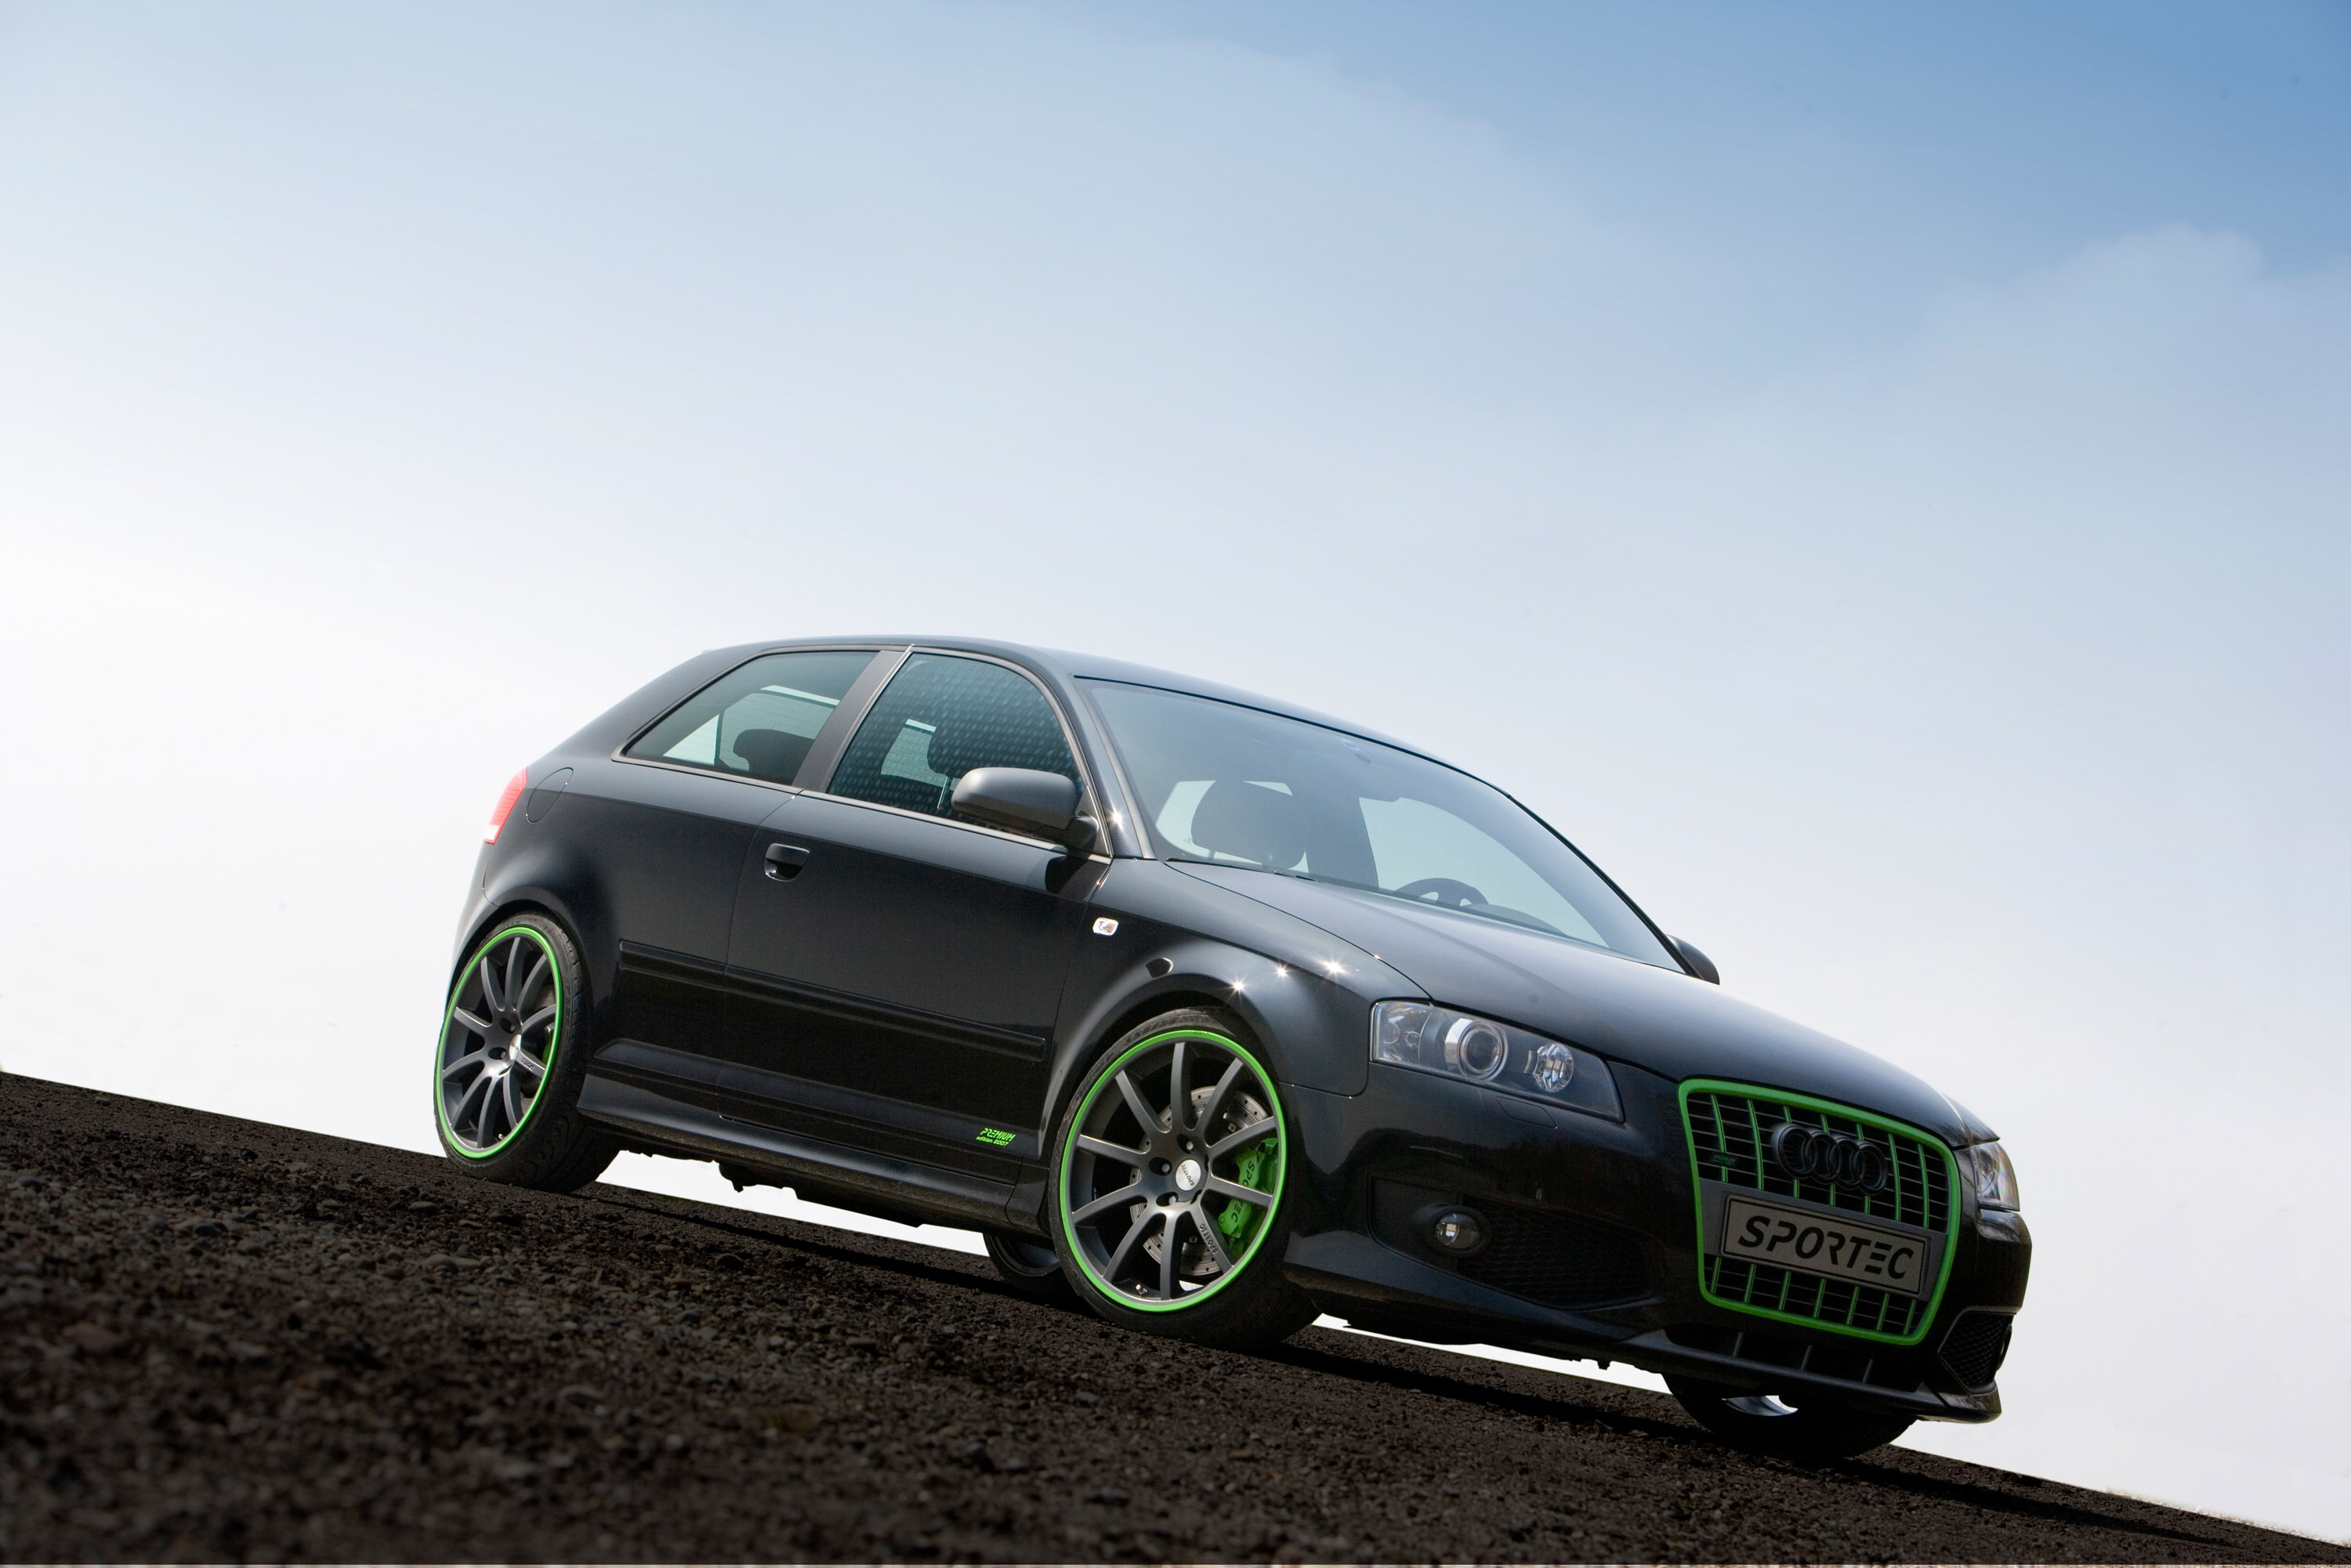 Sportec performance packages for VAG's 2.0TFSI engines